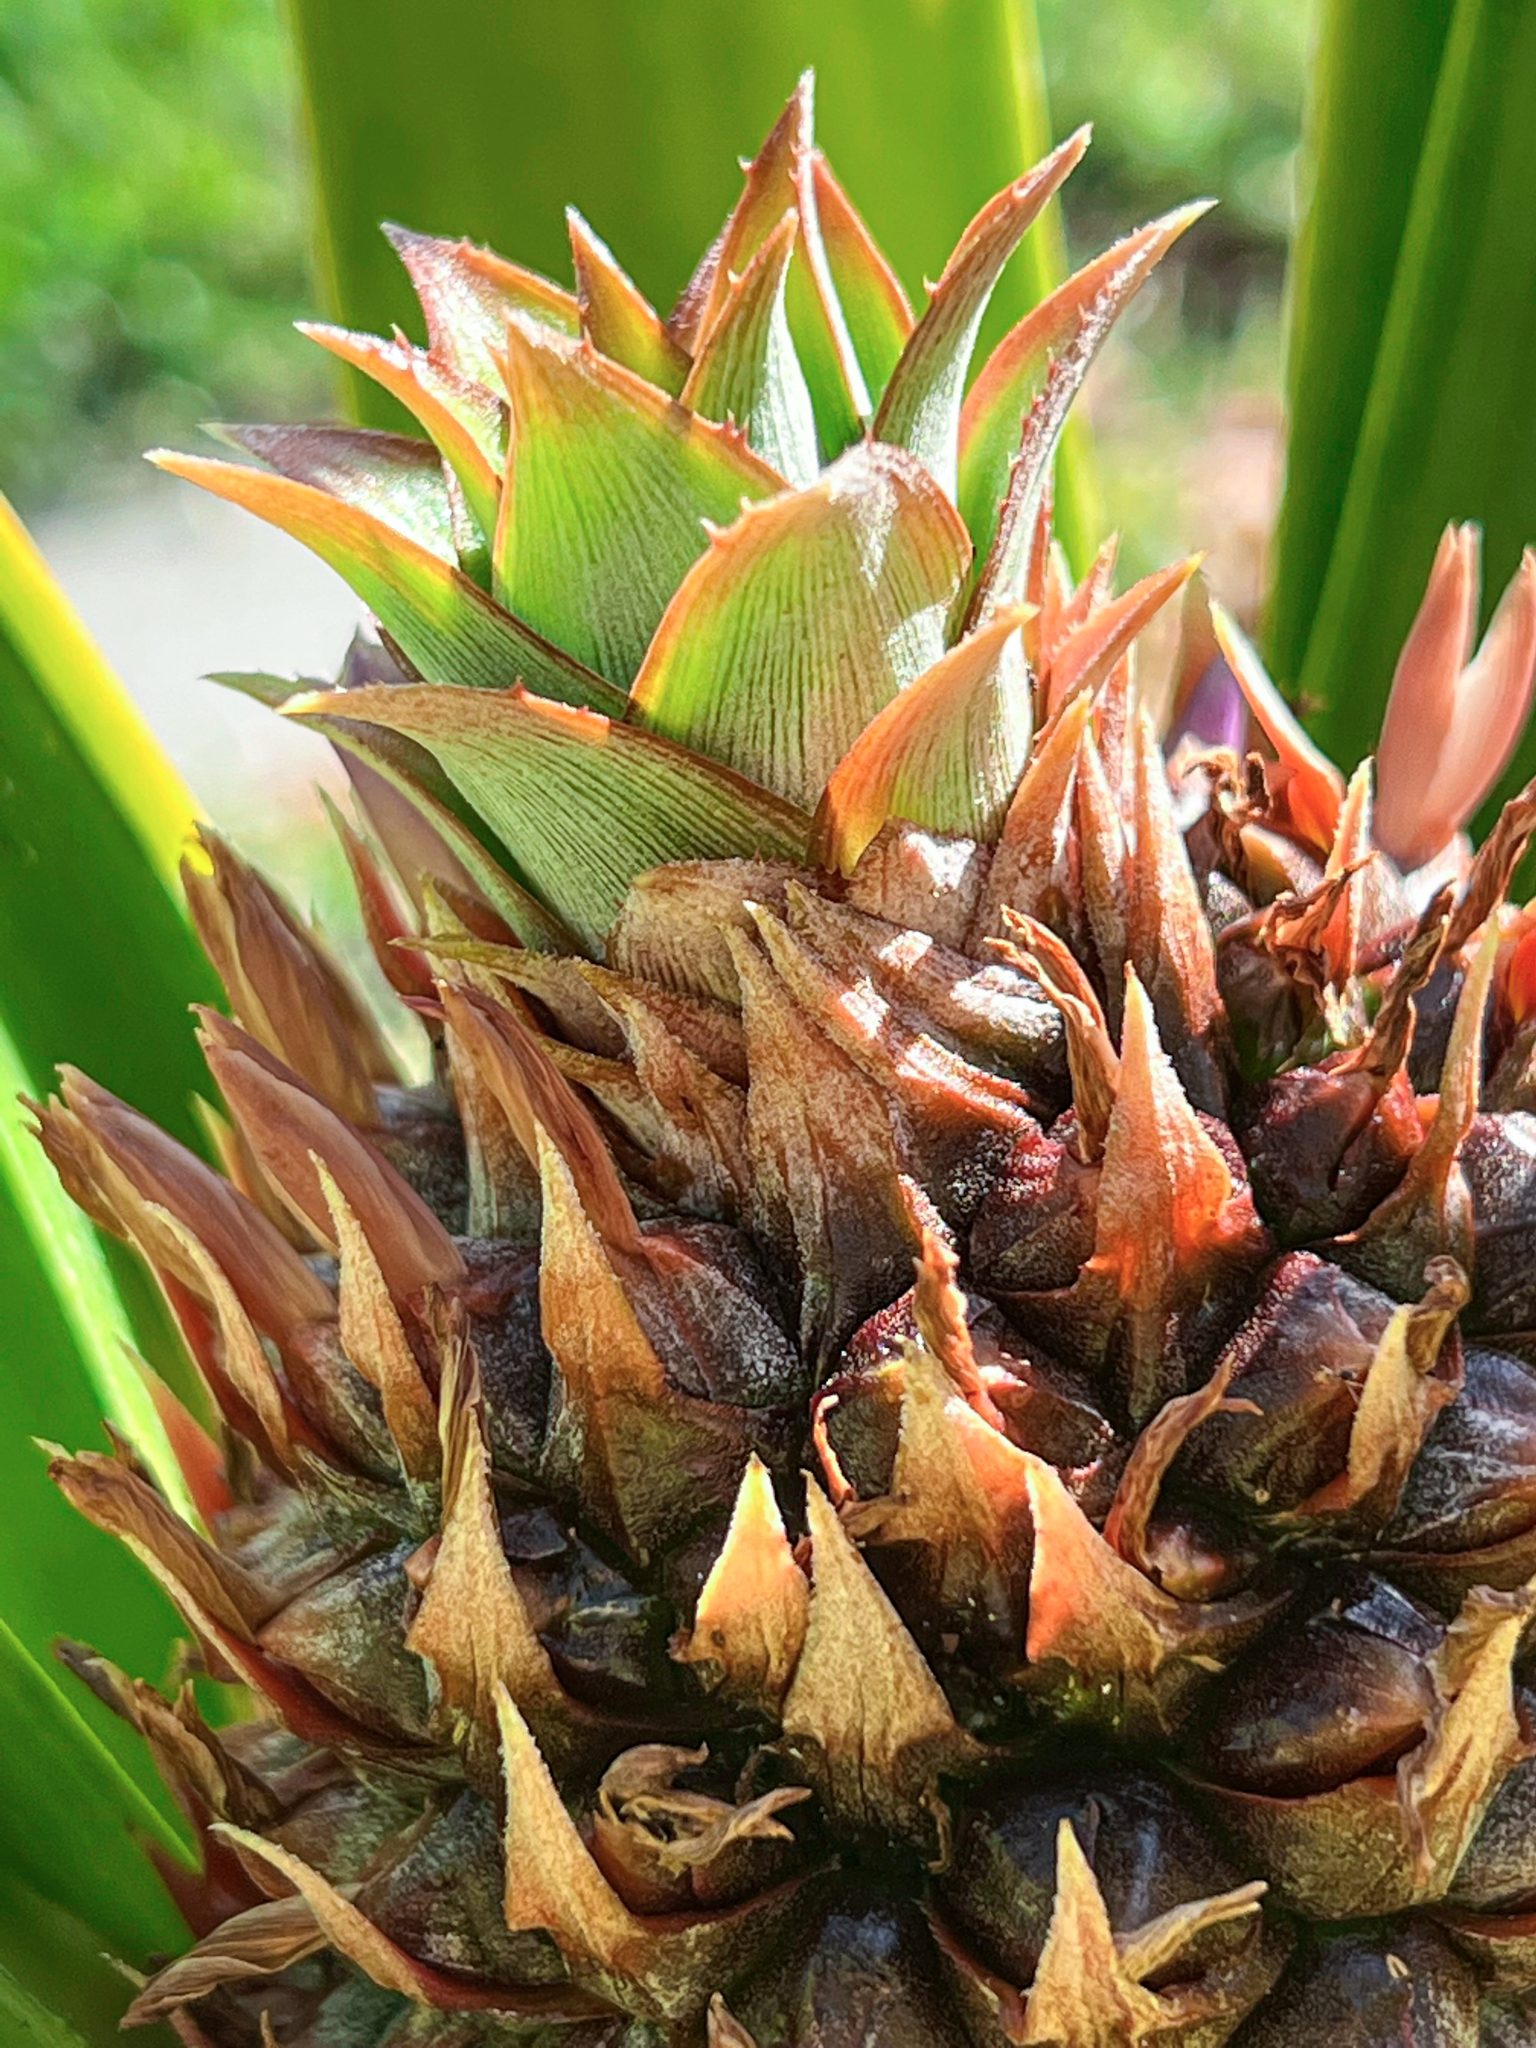 Top of a growing juvenile pineapple